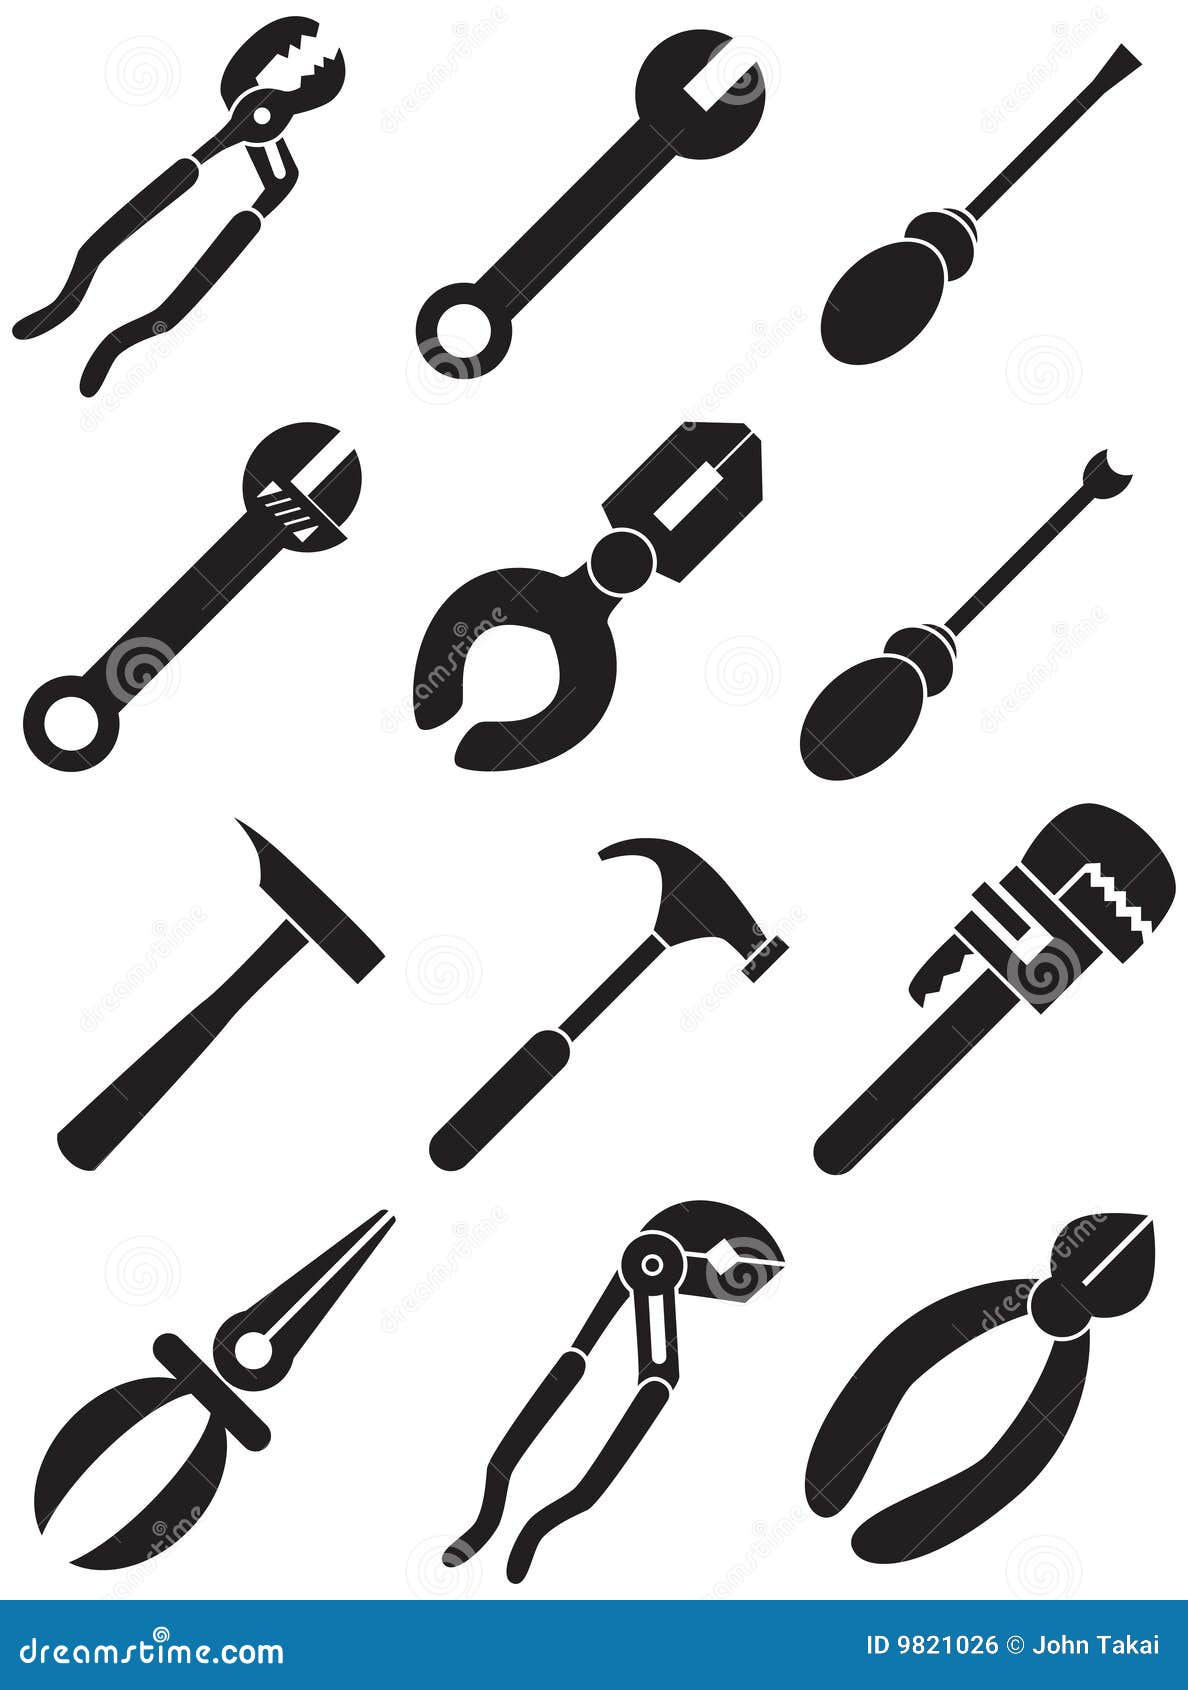 clipart tools black and white - photo #32